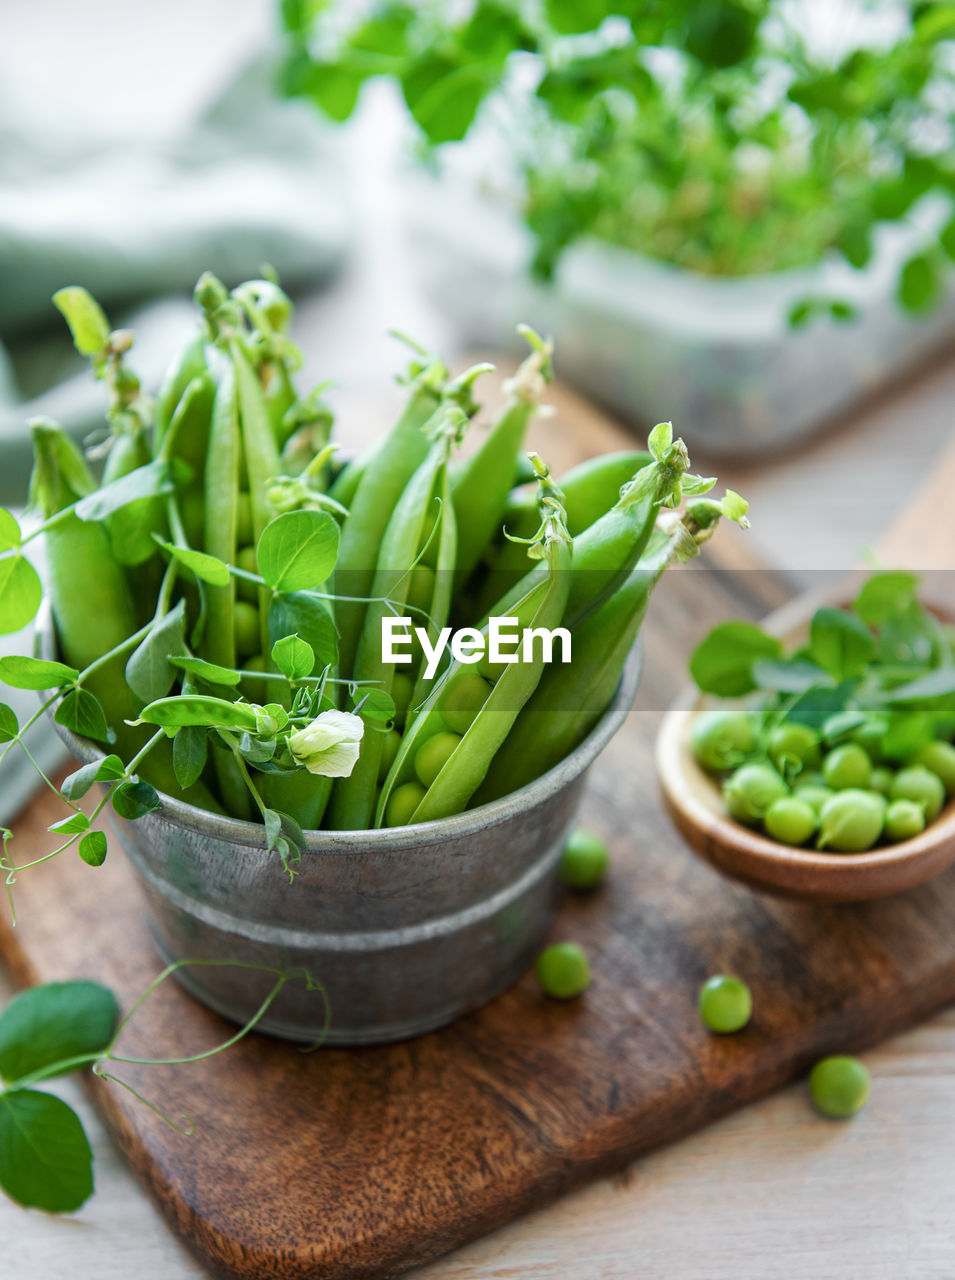 food, food and drink, healthy eating, vegetable, wellbeing, freshness, herb, plant, green, produce, studio shot, wood, no people, cutting board, indoors, spice, dish, leaf, plant part, bowl, ingredient, salad, organic, raw food, nature, focus on foreground